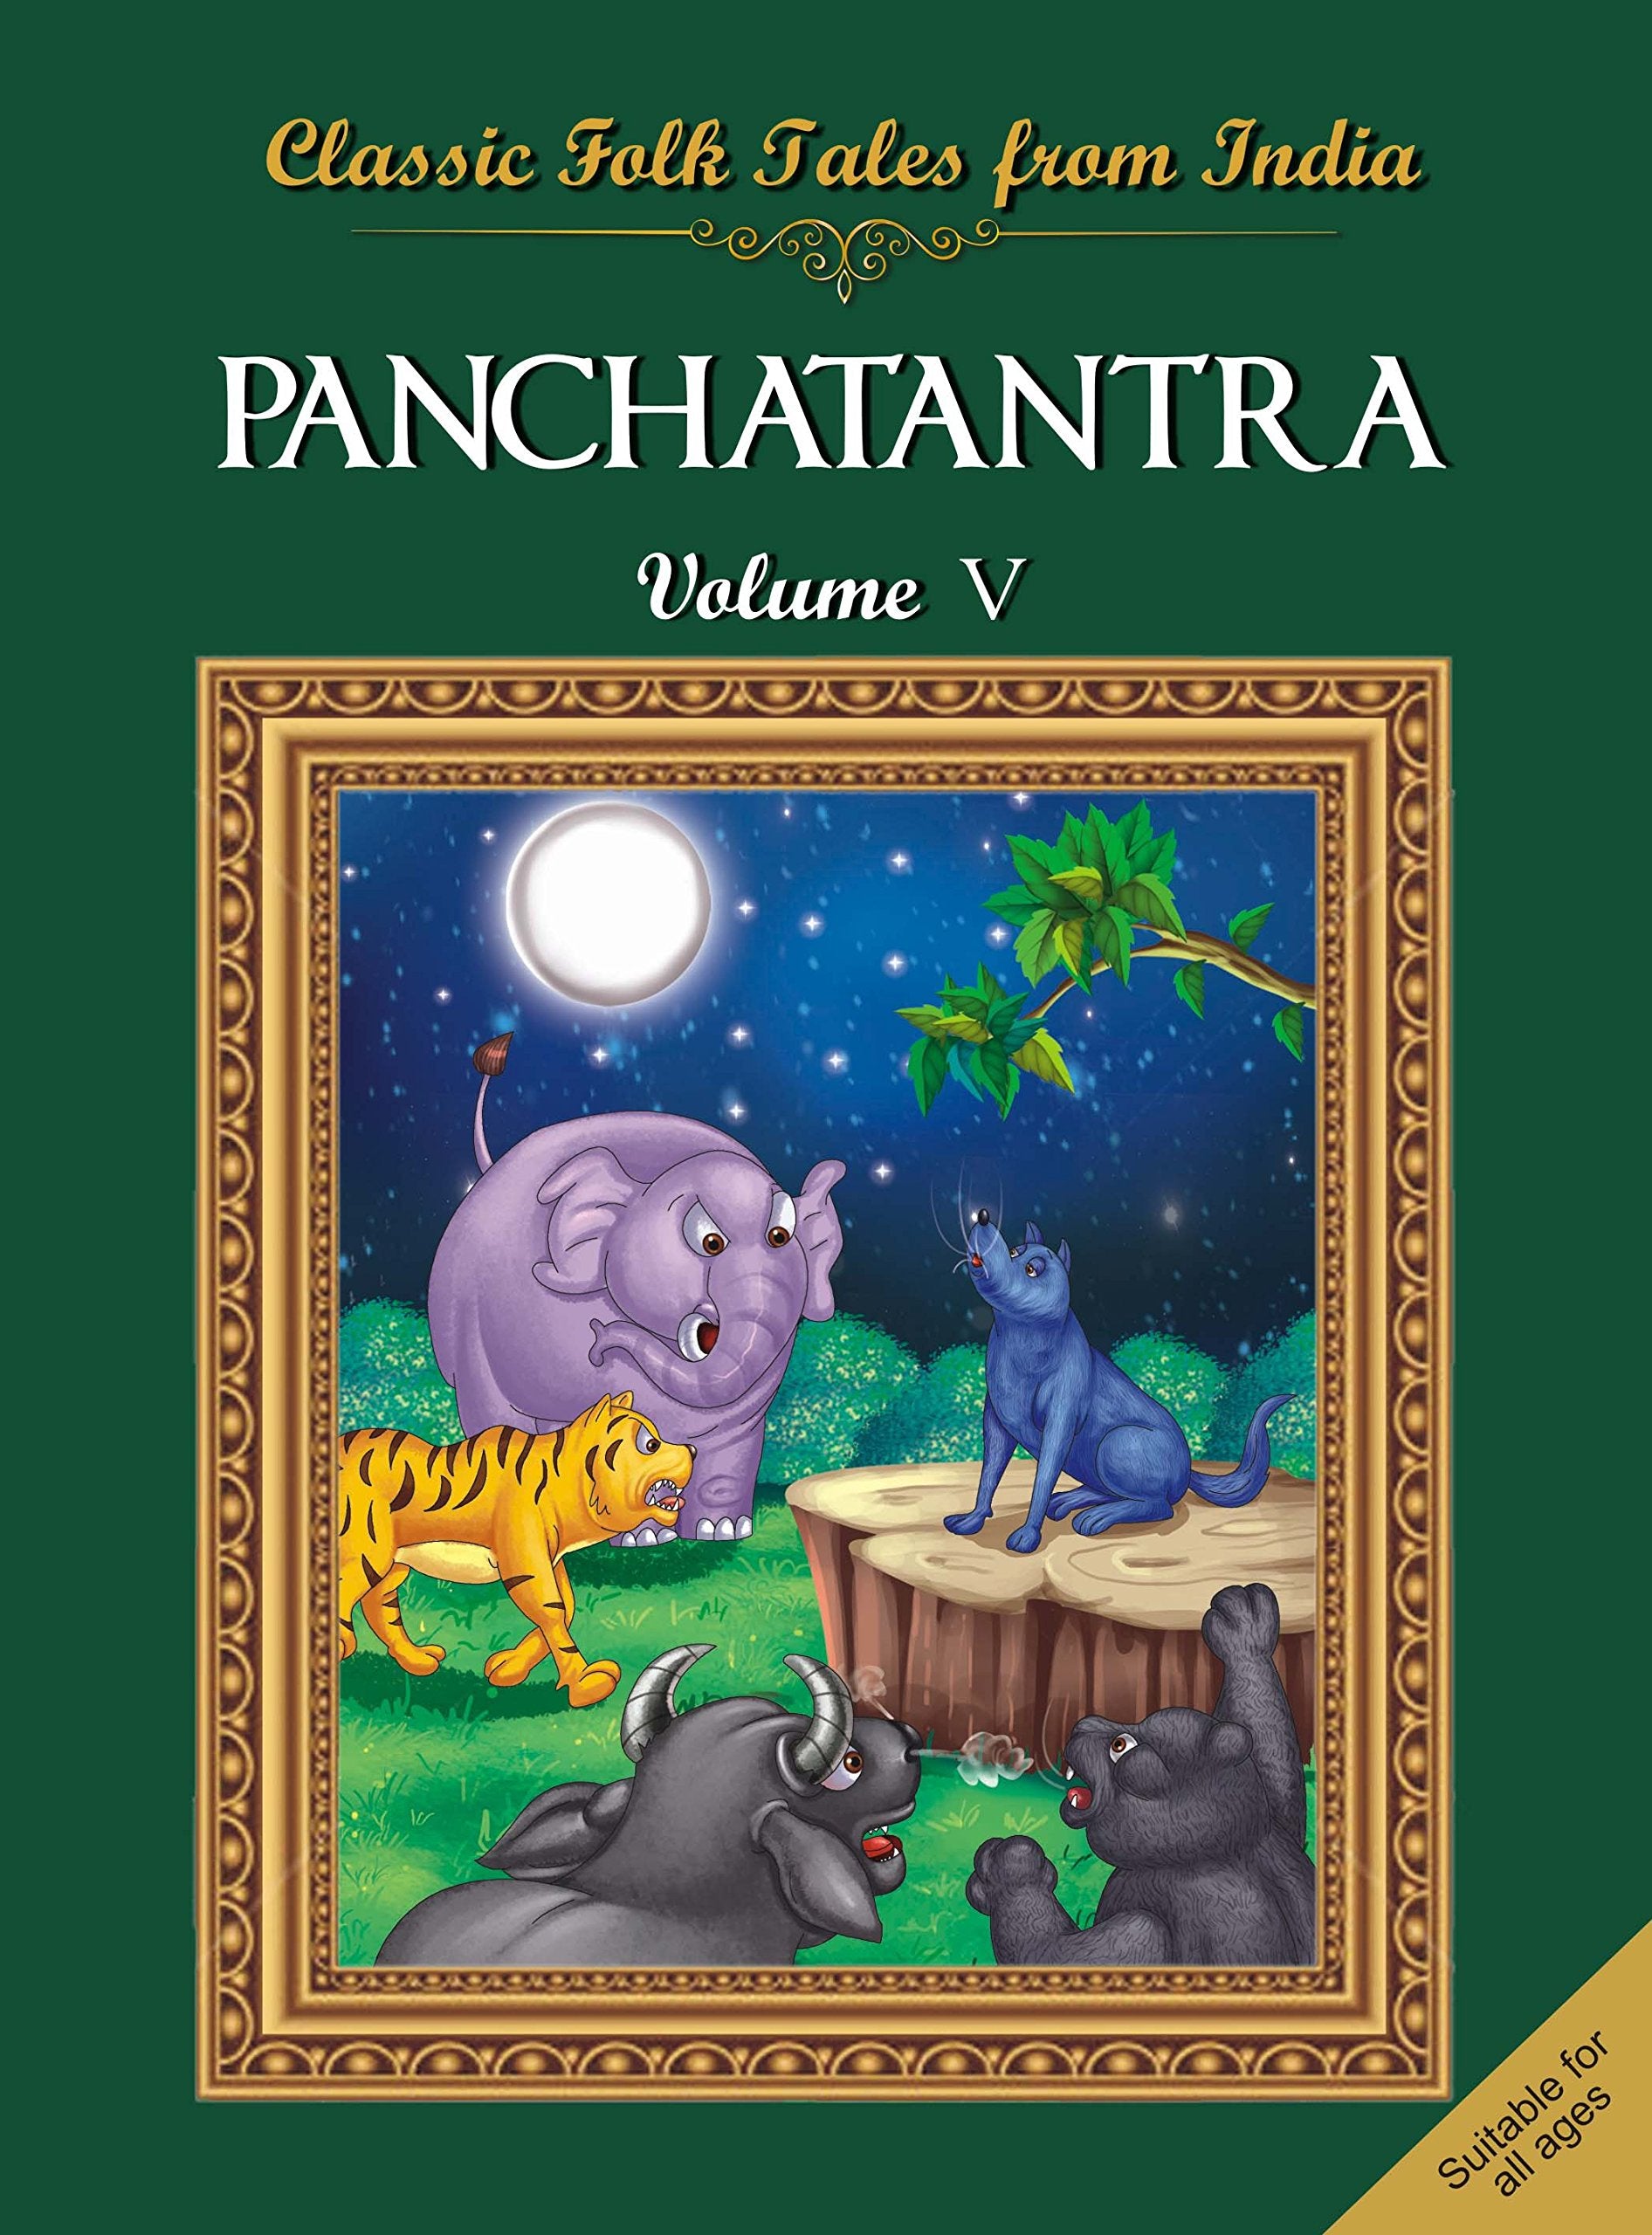 Classic Folk TalesFrom India :Panchatantra Vol V